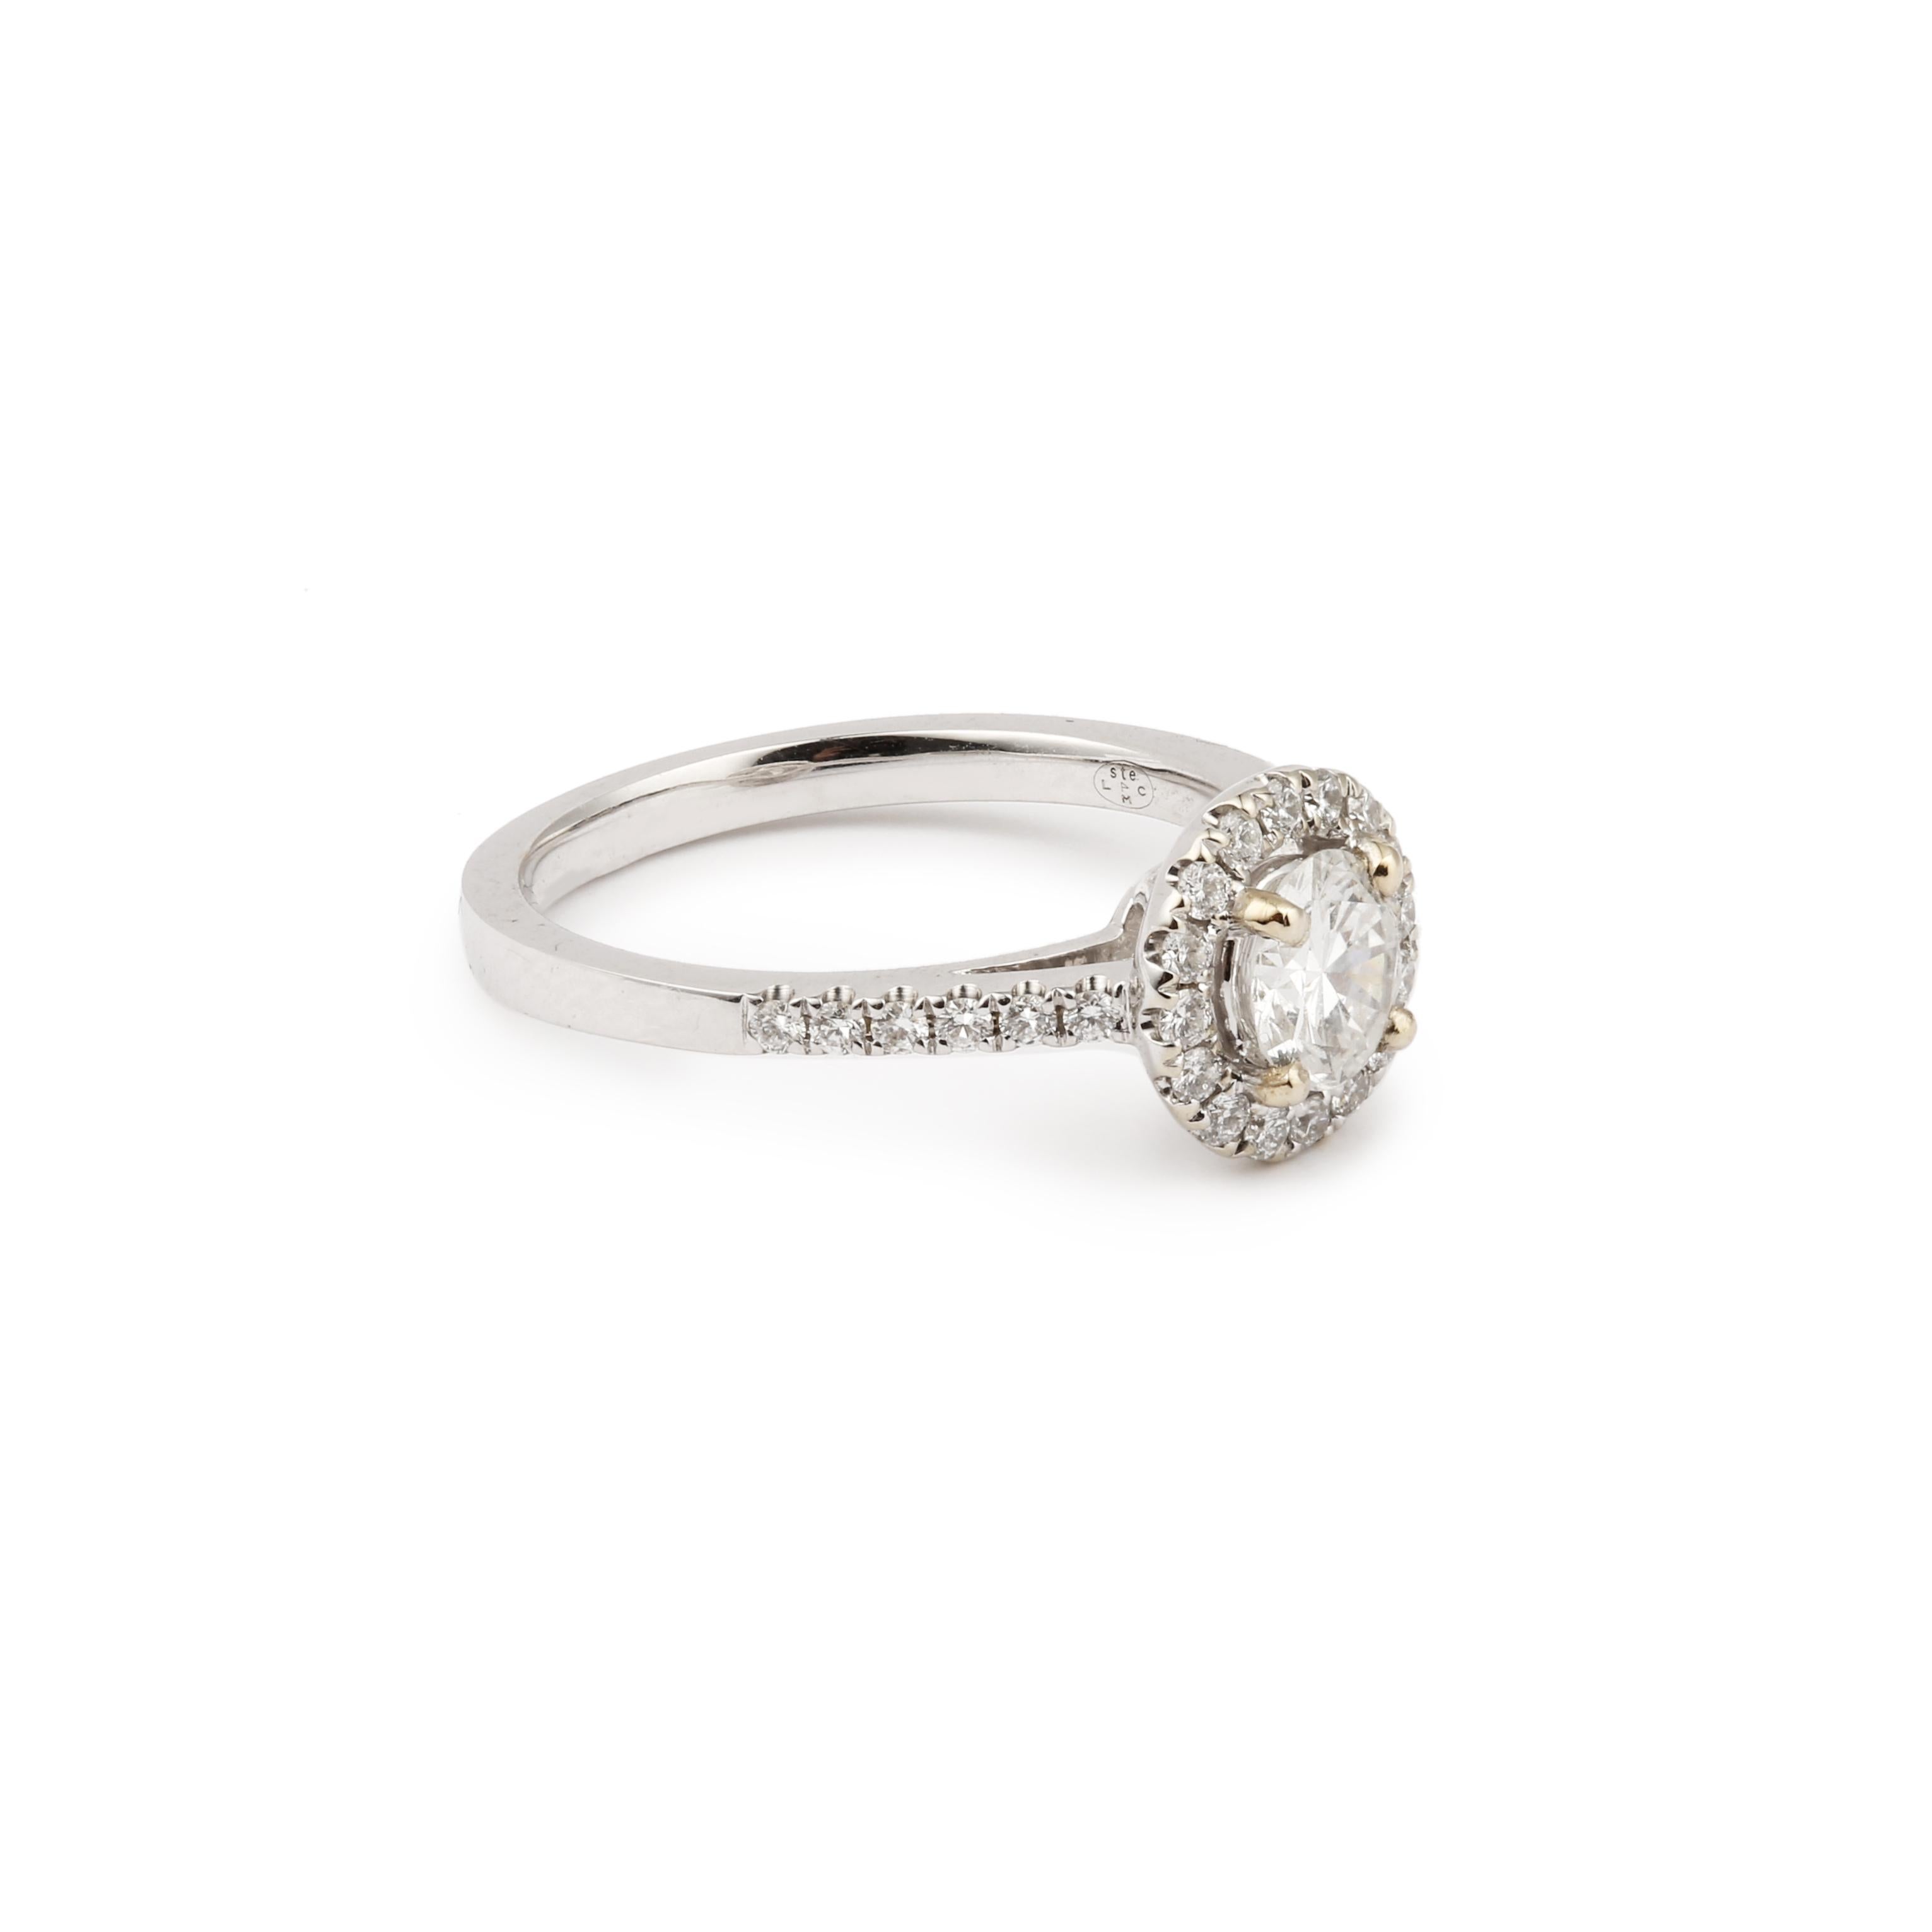 Very pretty daisy ring centered on a 0.60 ct brilliant-cut diamond surrounded by pave-cut diamonds.

One-of-a-kind piece. Ideal engagement ring!

Weight of central diamond: 0.60 carats

With a Carat Gem Lab certificate specifying F color, SI1